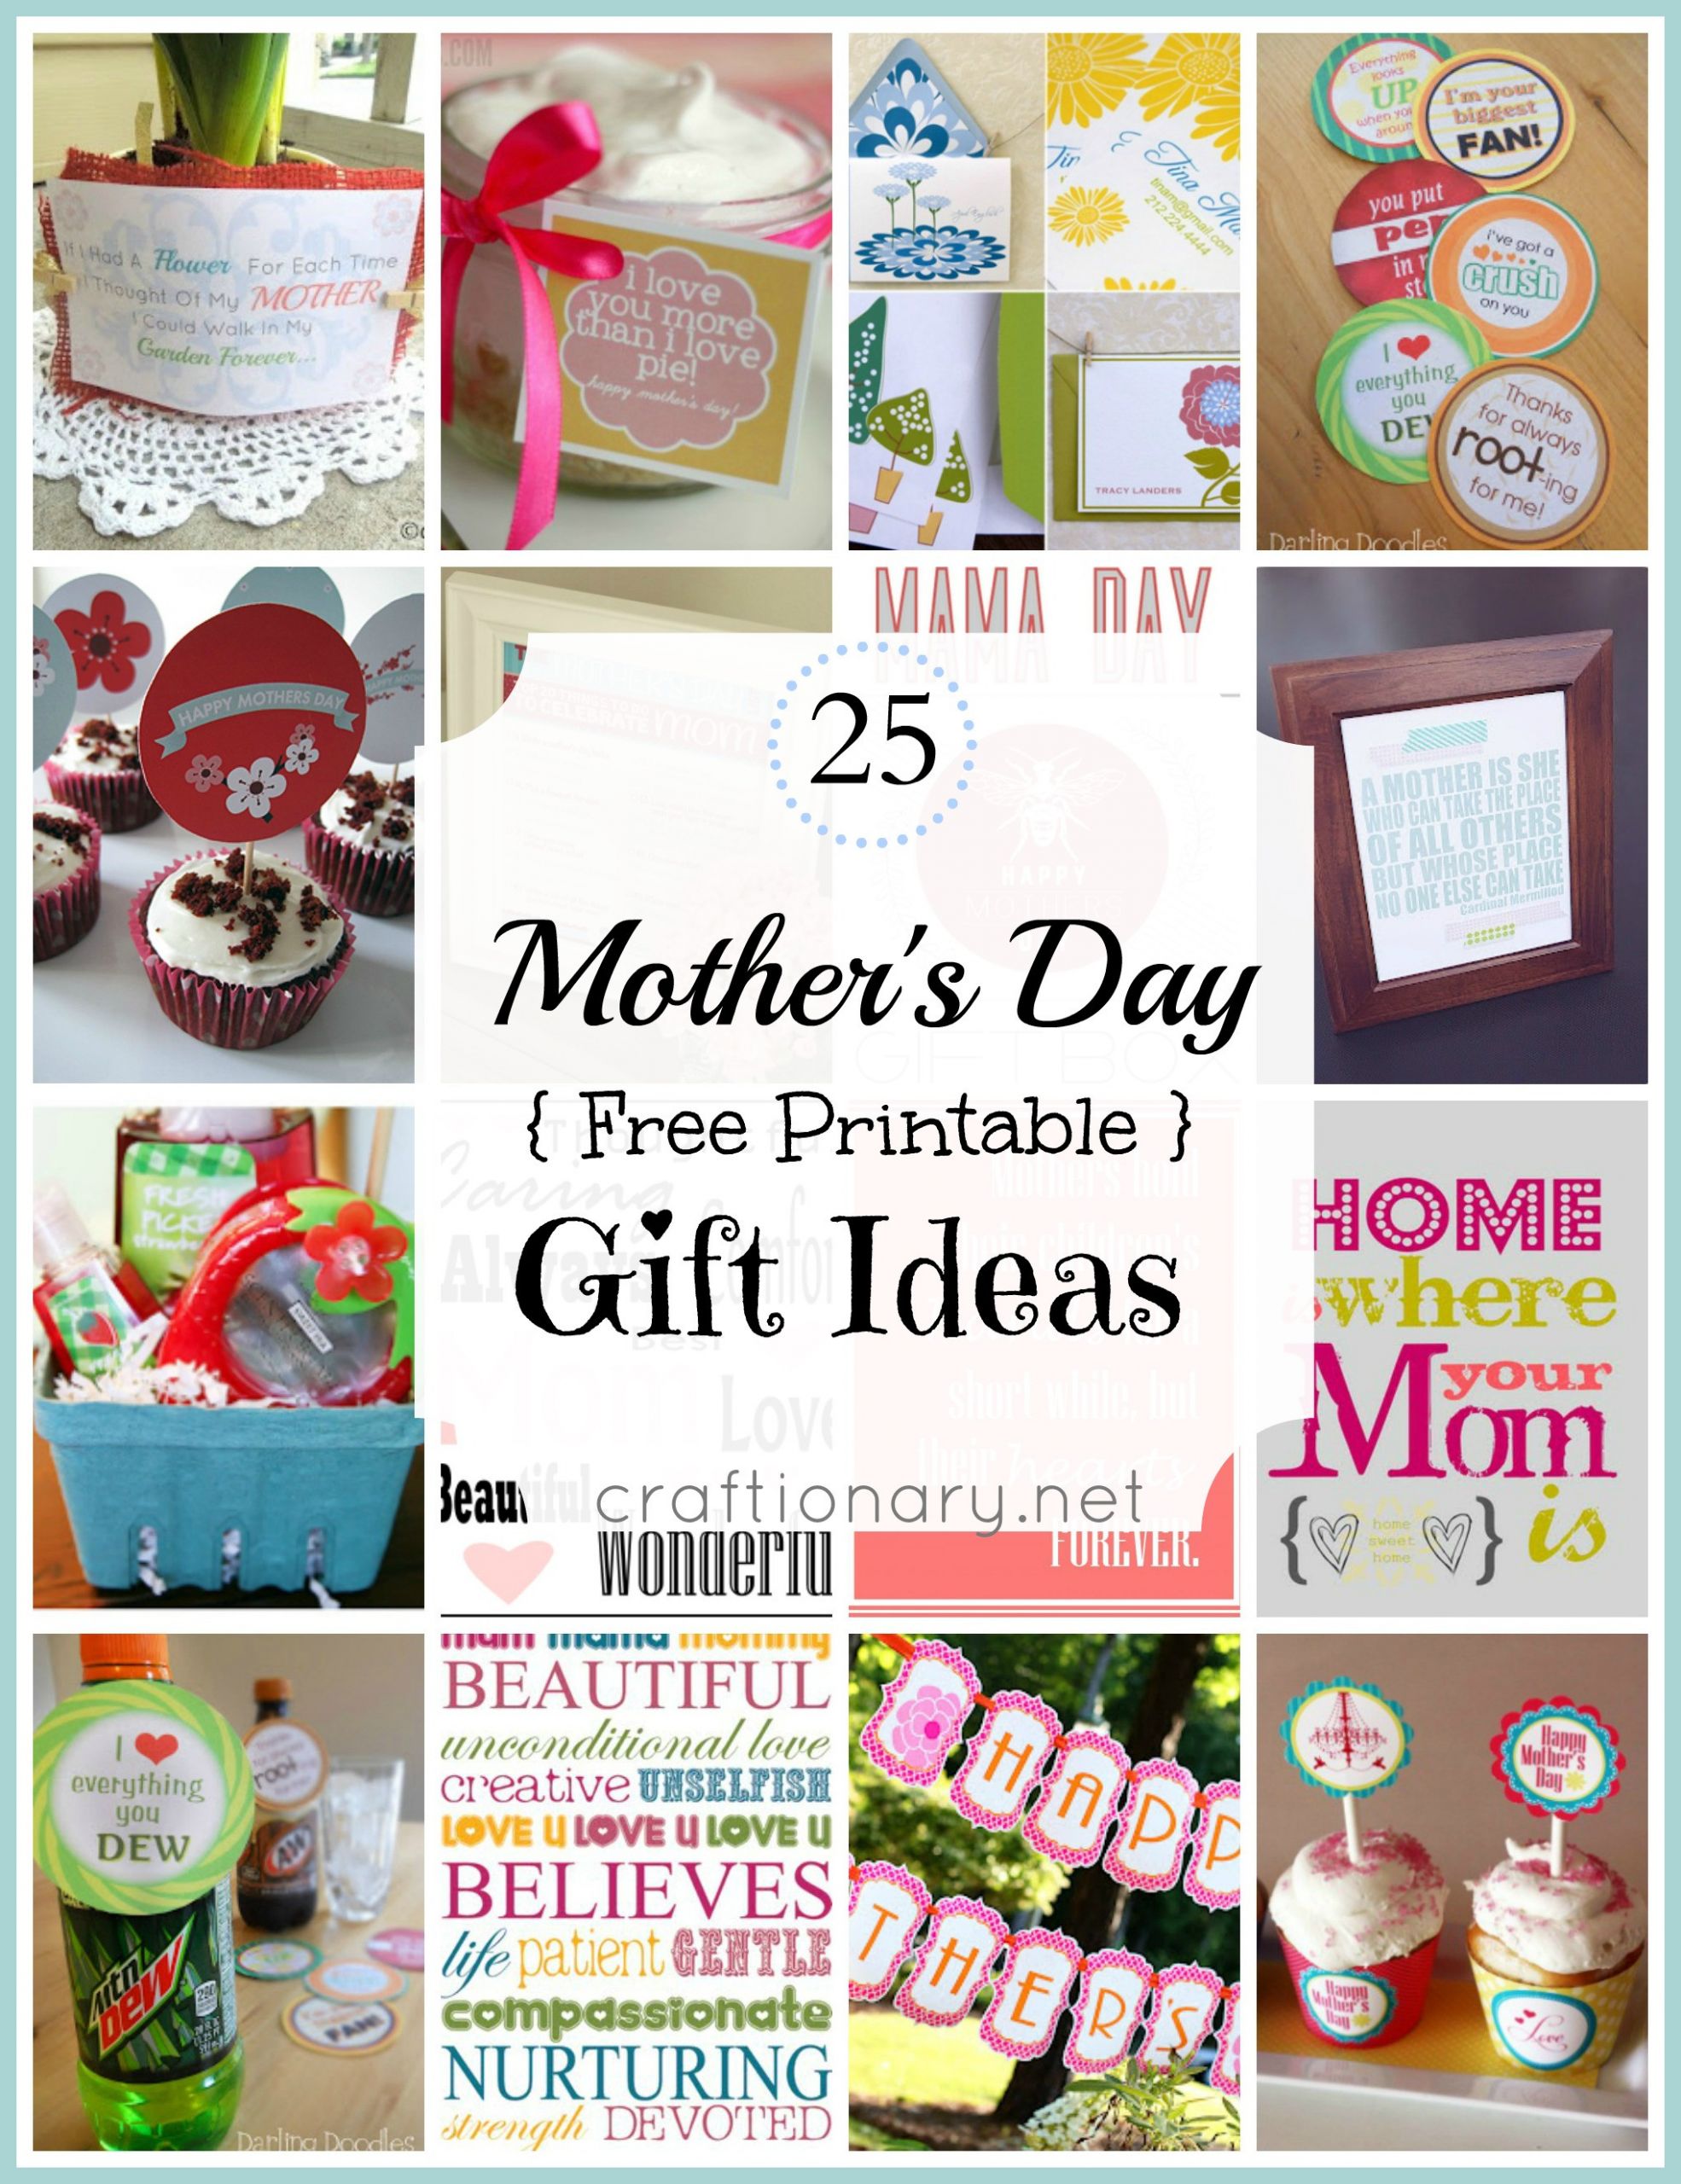 Best Gift Ideas For Mom
 Craftionary